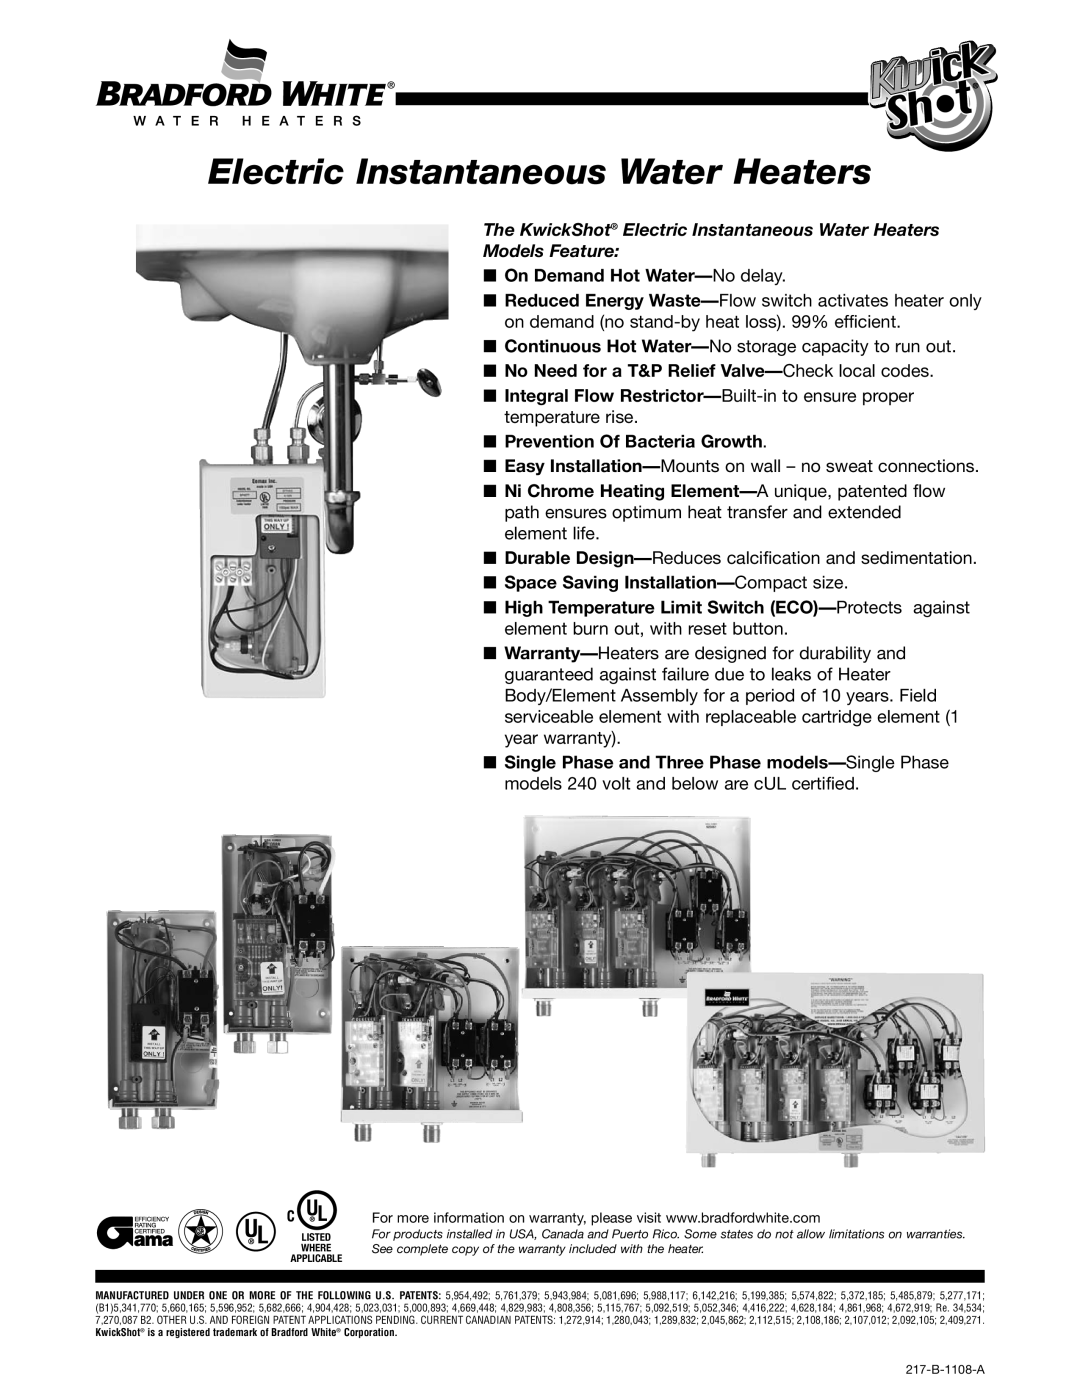 Bradford-White Corp Electric Instantaneous Water Heaters warranty On Demand Hot Water-No delay, Listed, Where, Applicable 